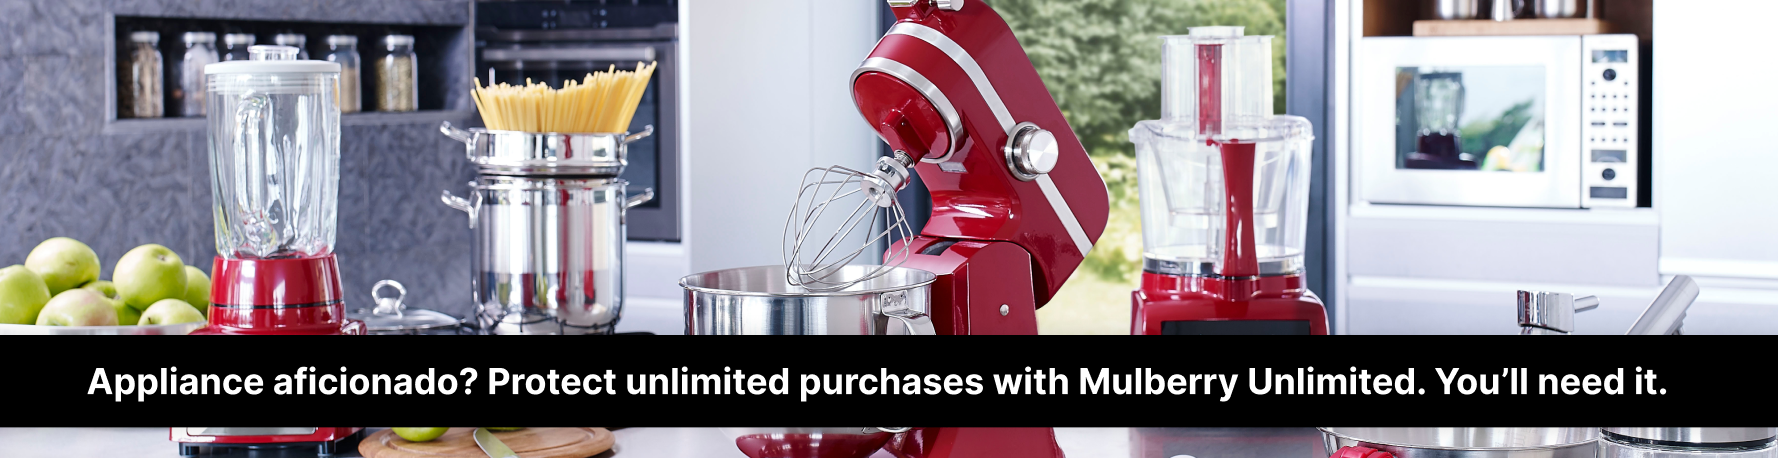 Appliance aficionado? Protect unlimited purchases with Mulberry Unlimited. You'll need it.